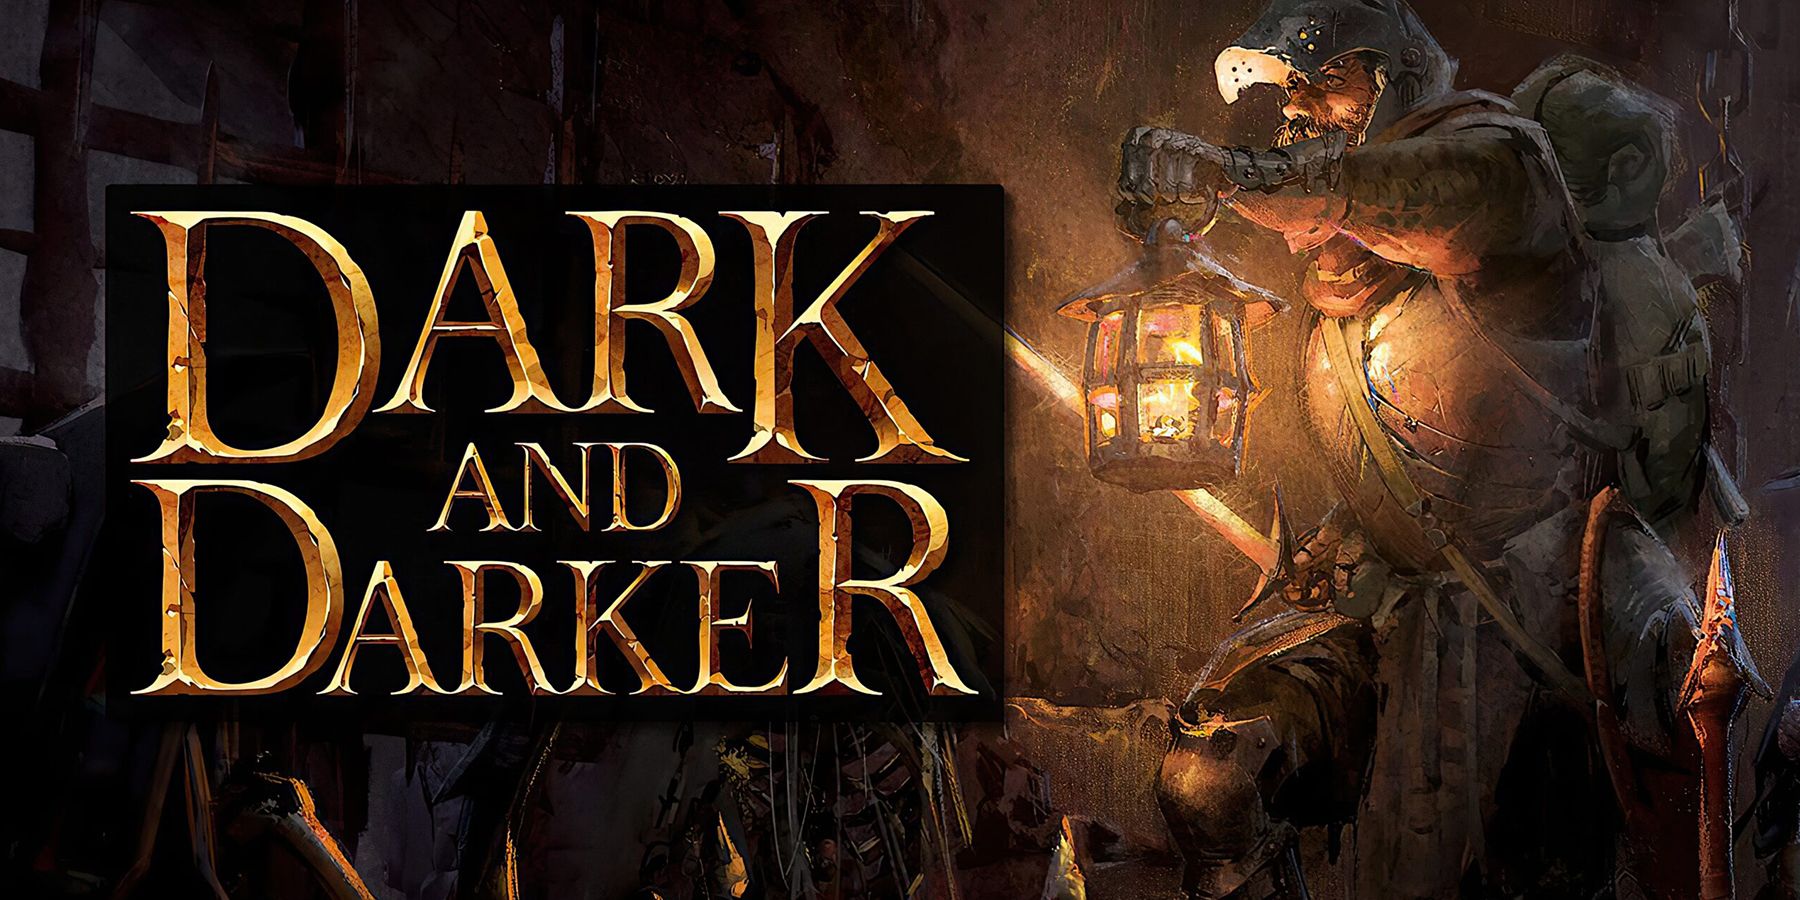 Dark and Darker launches then deletes a GoFundMe campaign to raise